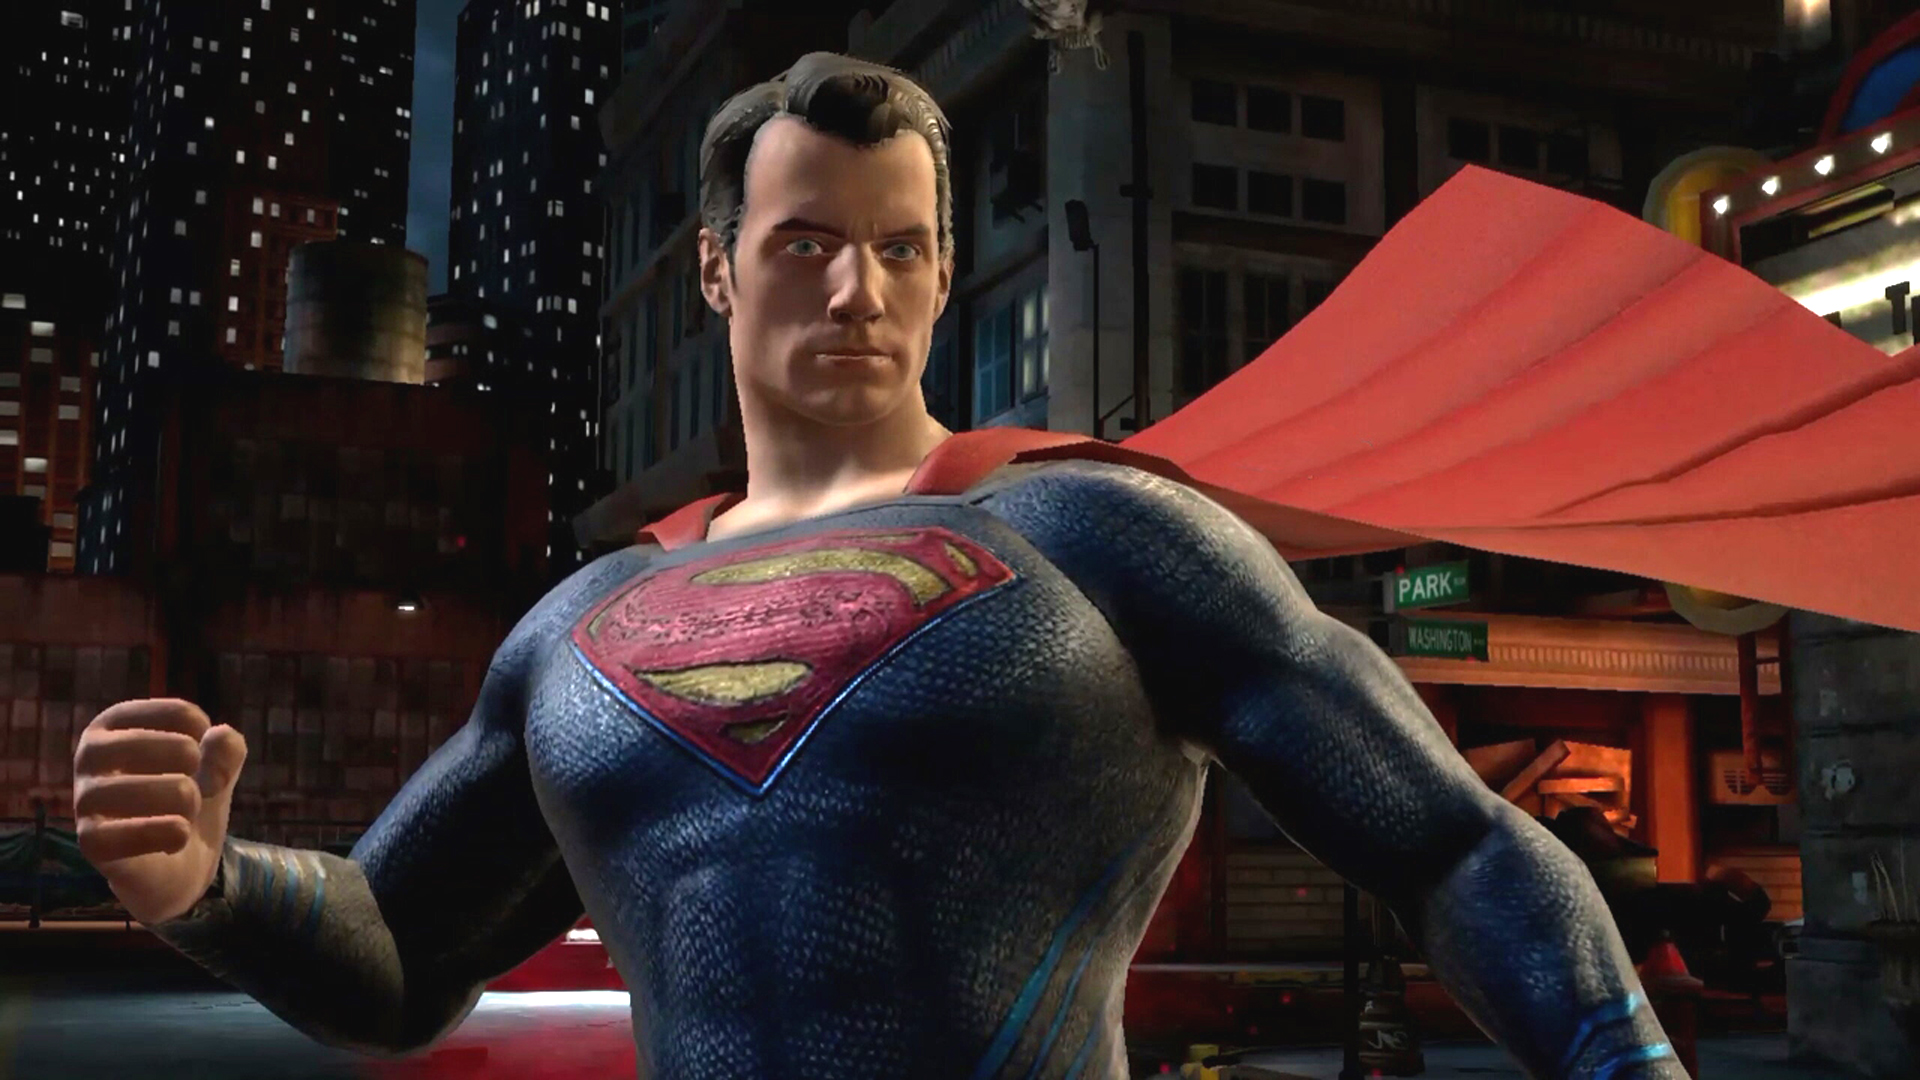 New Job Listing Suggests WB Montreal Could Be Working On A Superman Game -  Bounding Into Comics